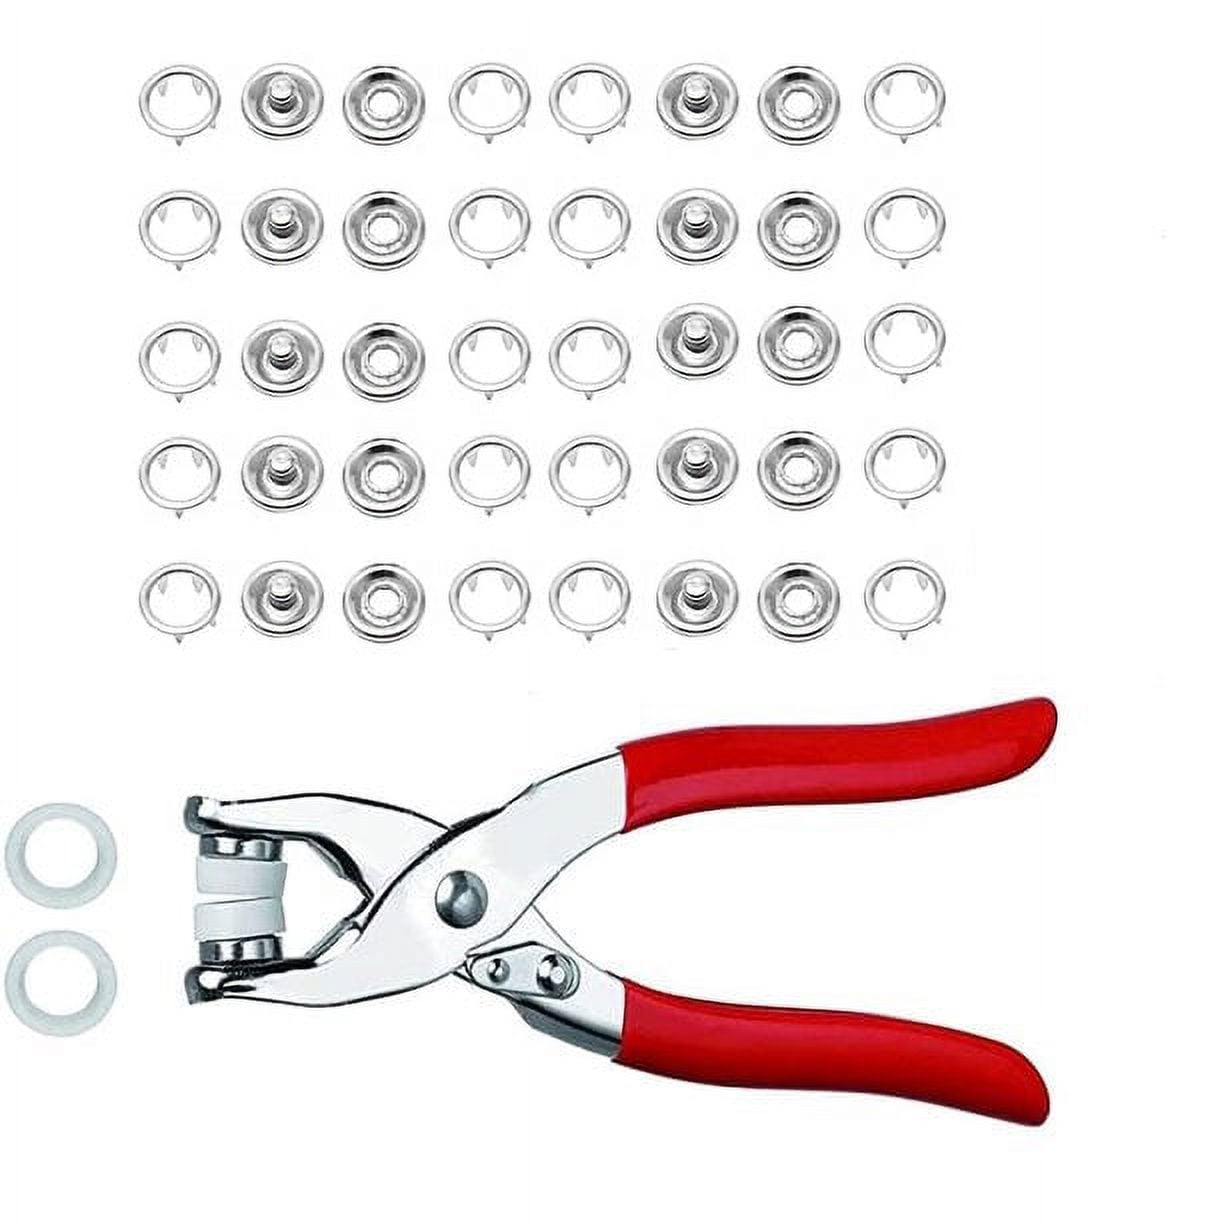 Button Press Tool Kit 5 Sizes for Sheathing Button Sewing 